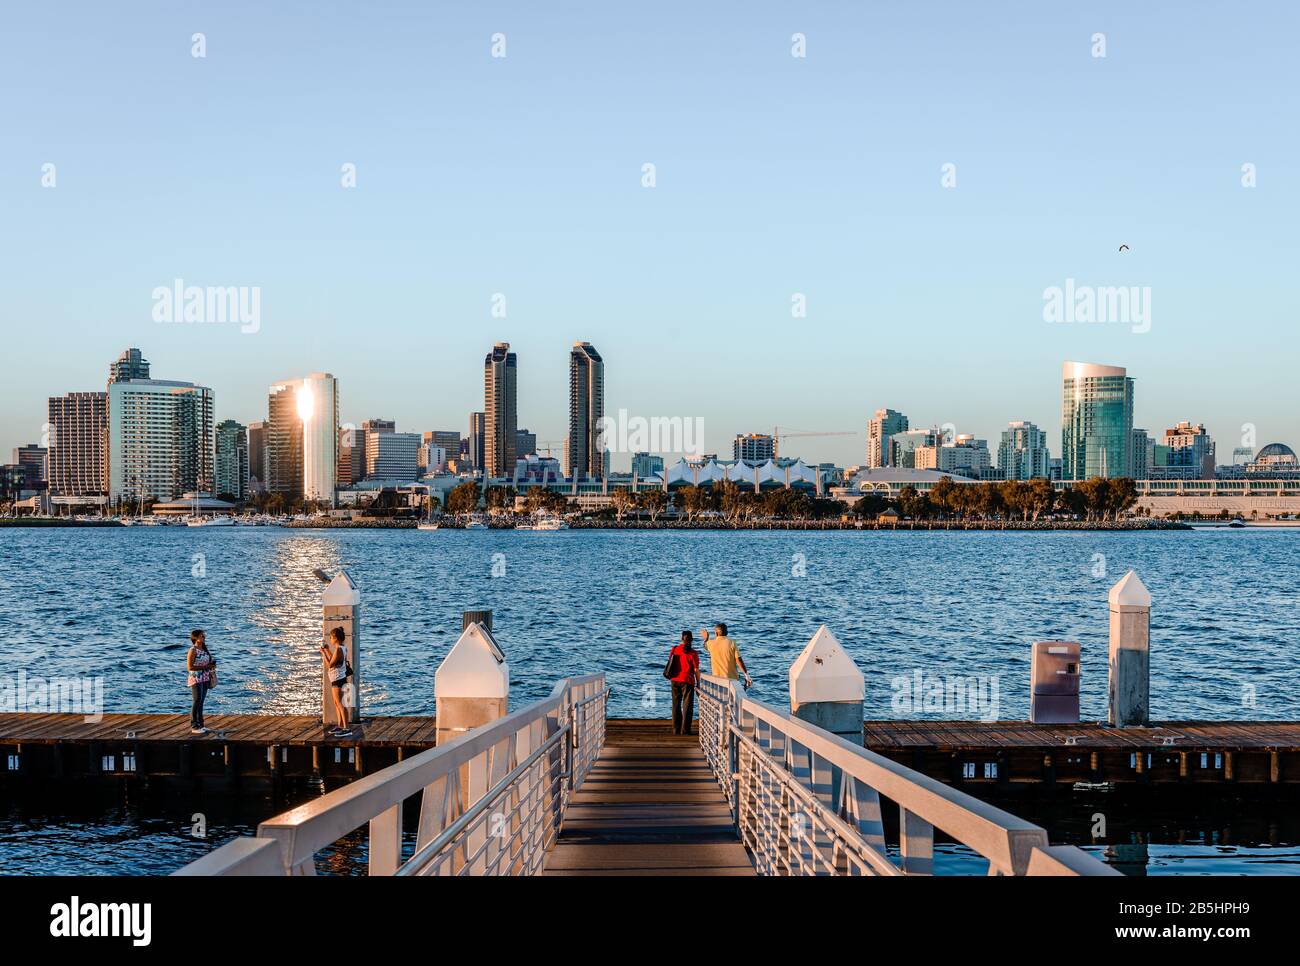 Coronado, CA / USA - July 24, 2015: A view of San Diego from Coronado, in the afternoon. Stock Photo